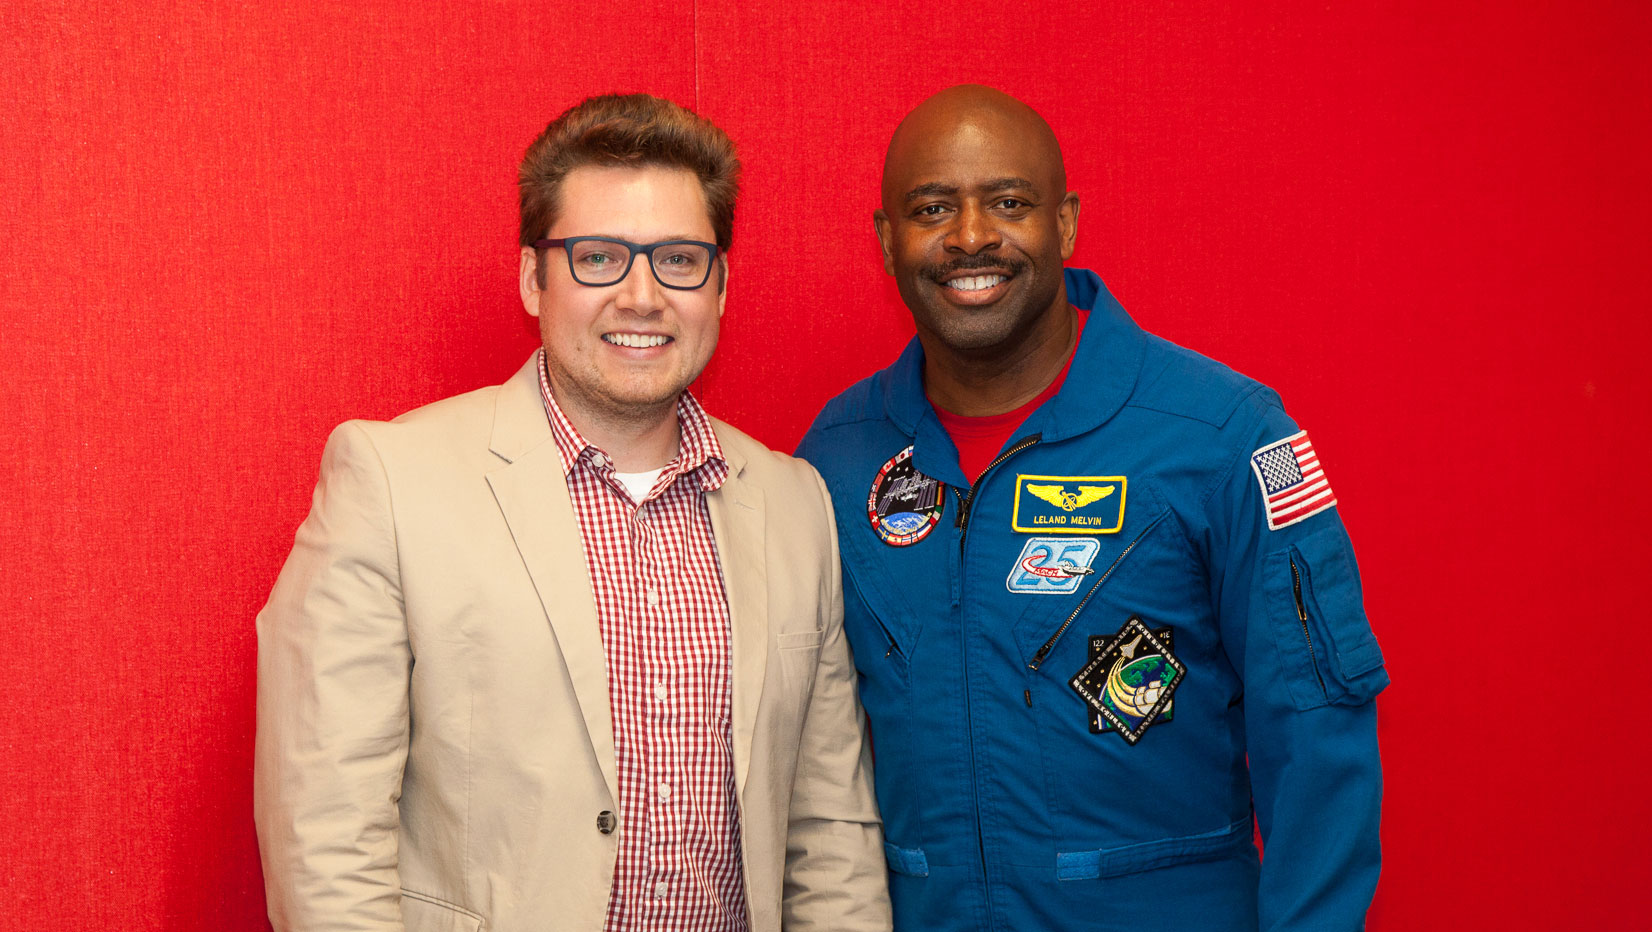 two men stand in front of a red background, one (Leland Melvin) is wearing an astronaut uniform